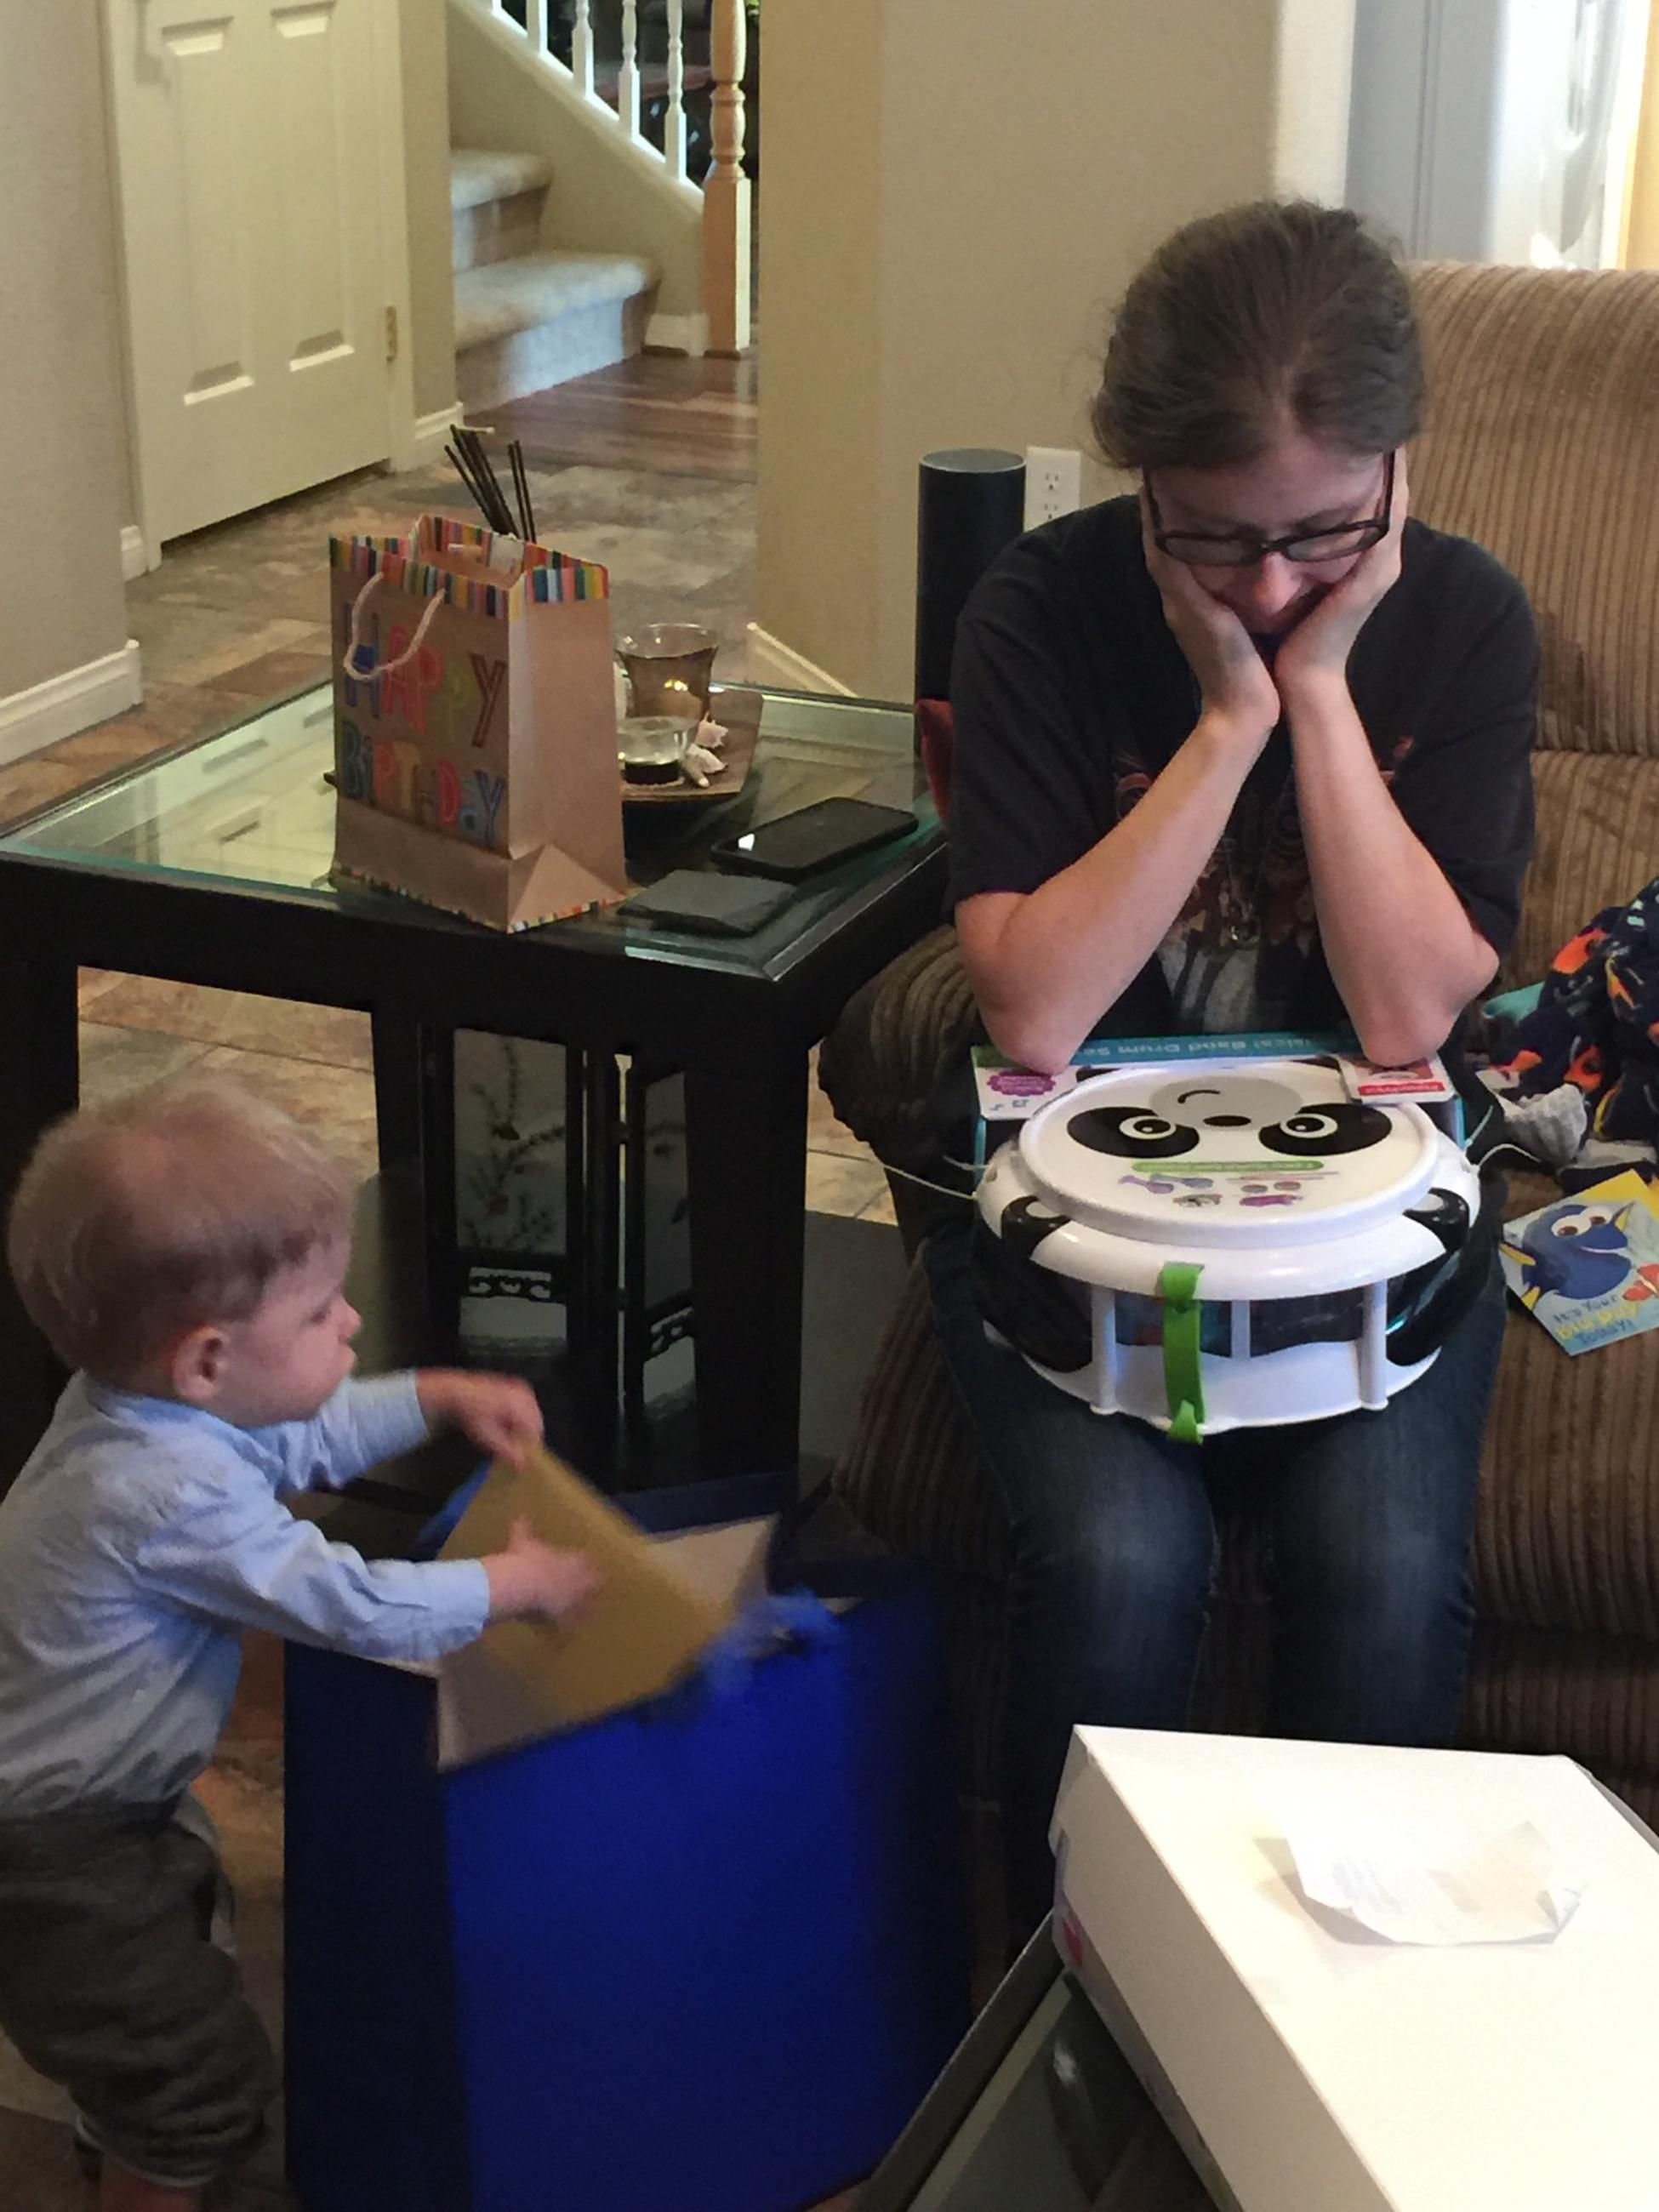 The moment your daughter realizes you bought the grandson musical instruments for his birthday